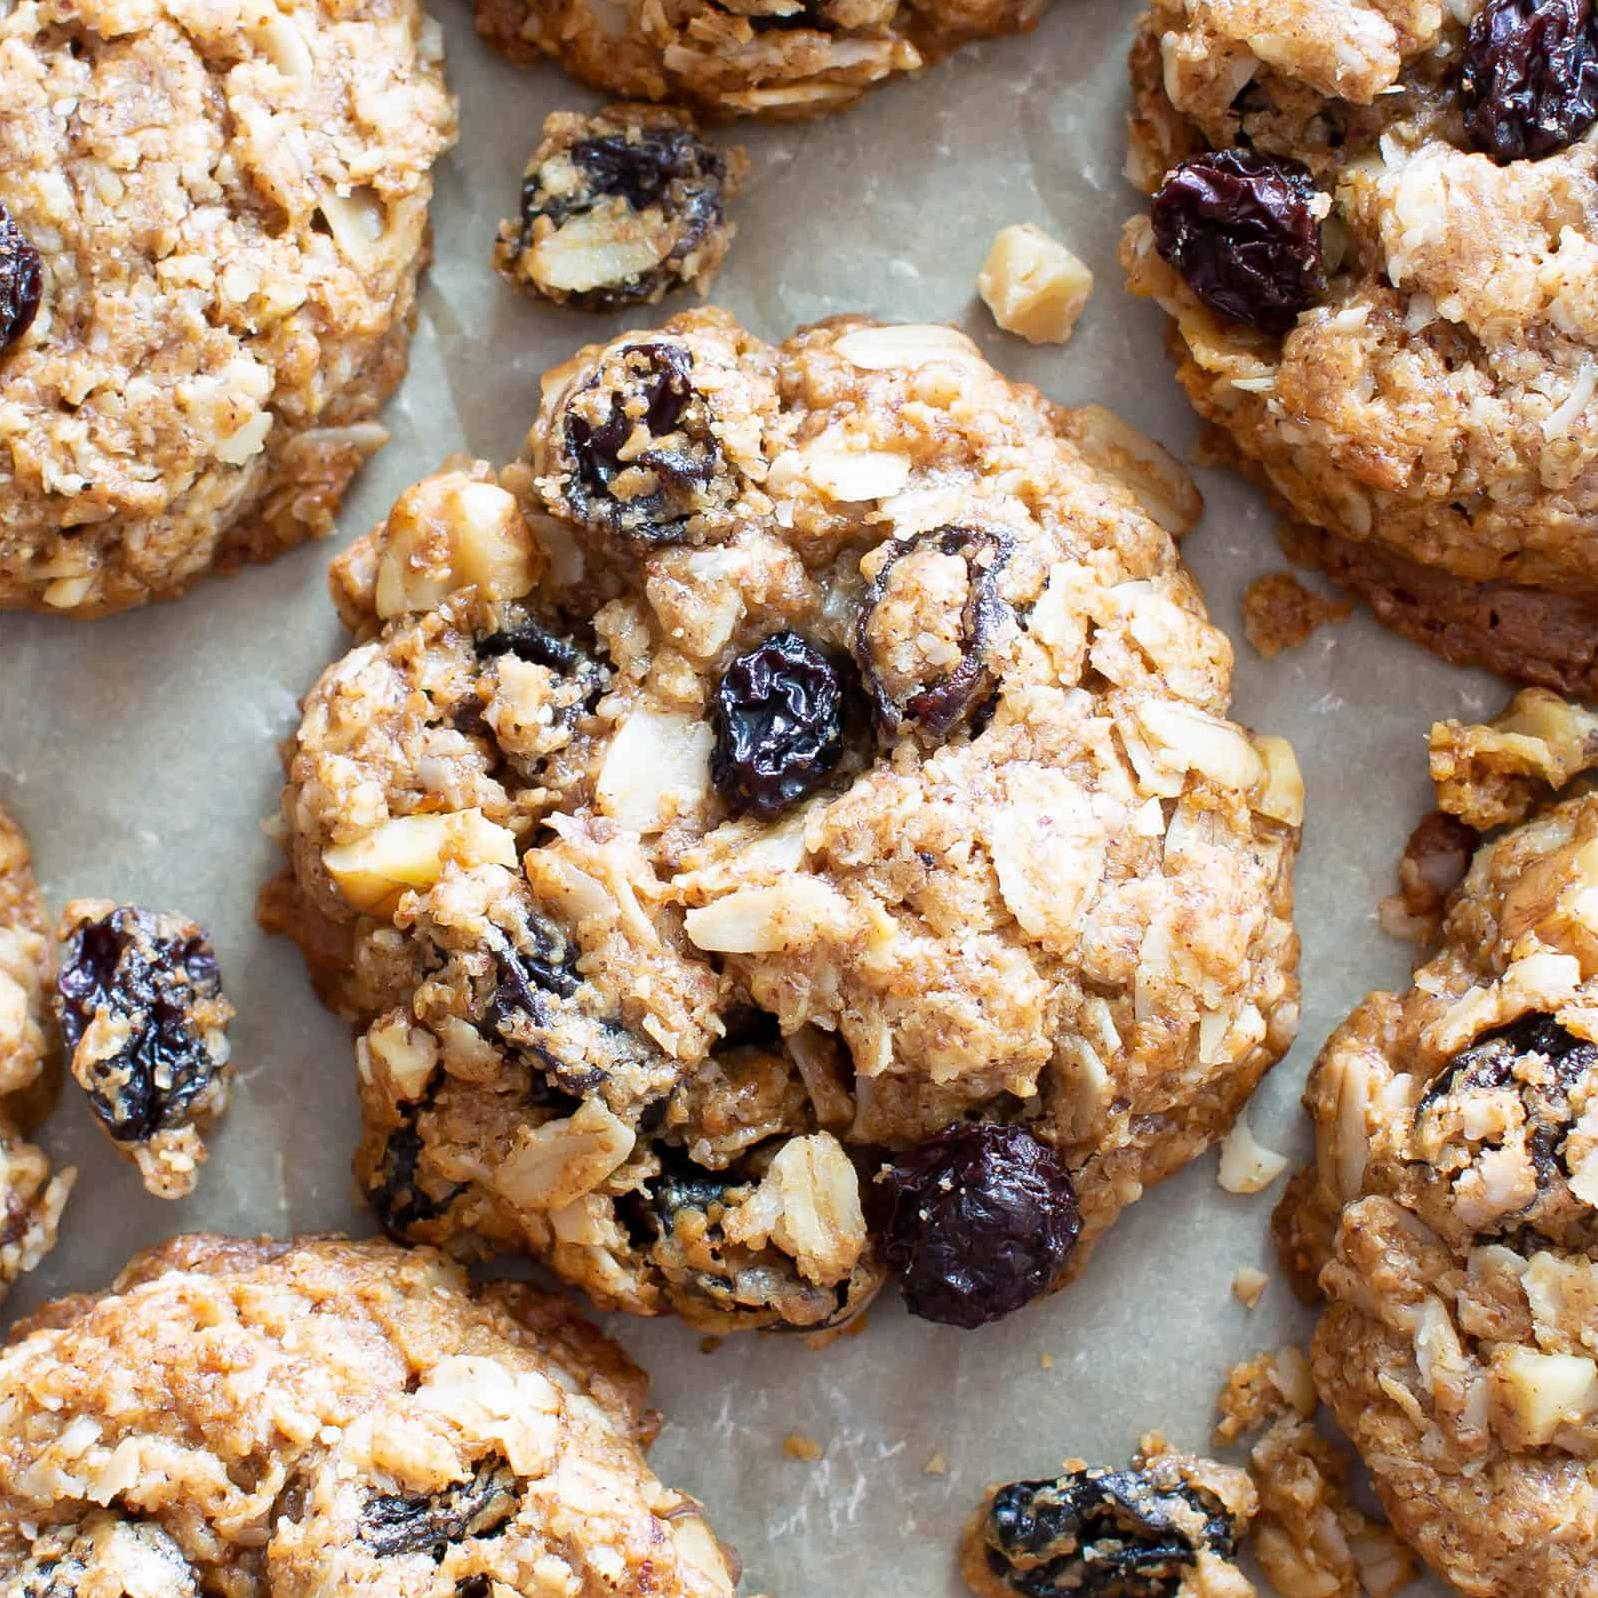  These cookies are so delicious, you won't even realize they're vegan!